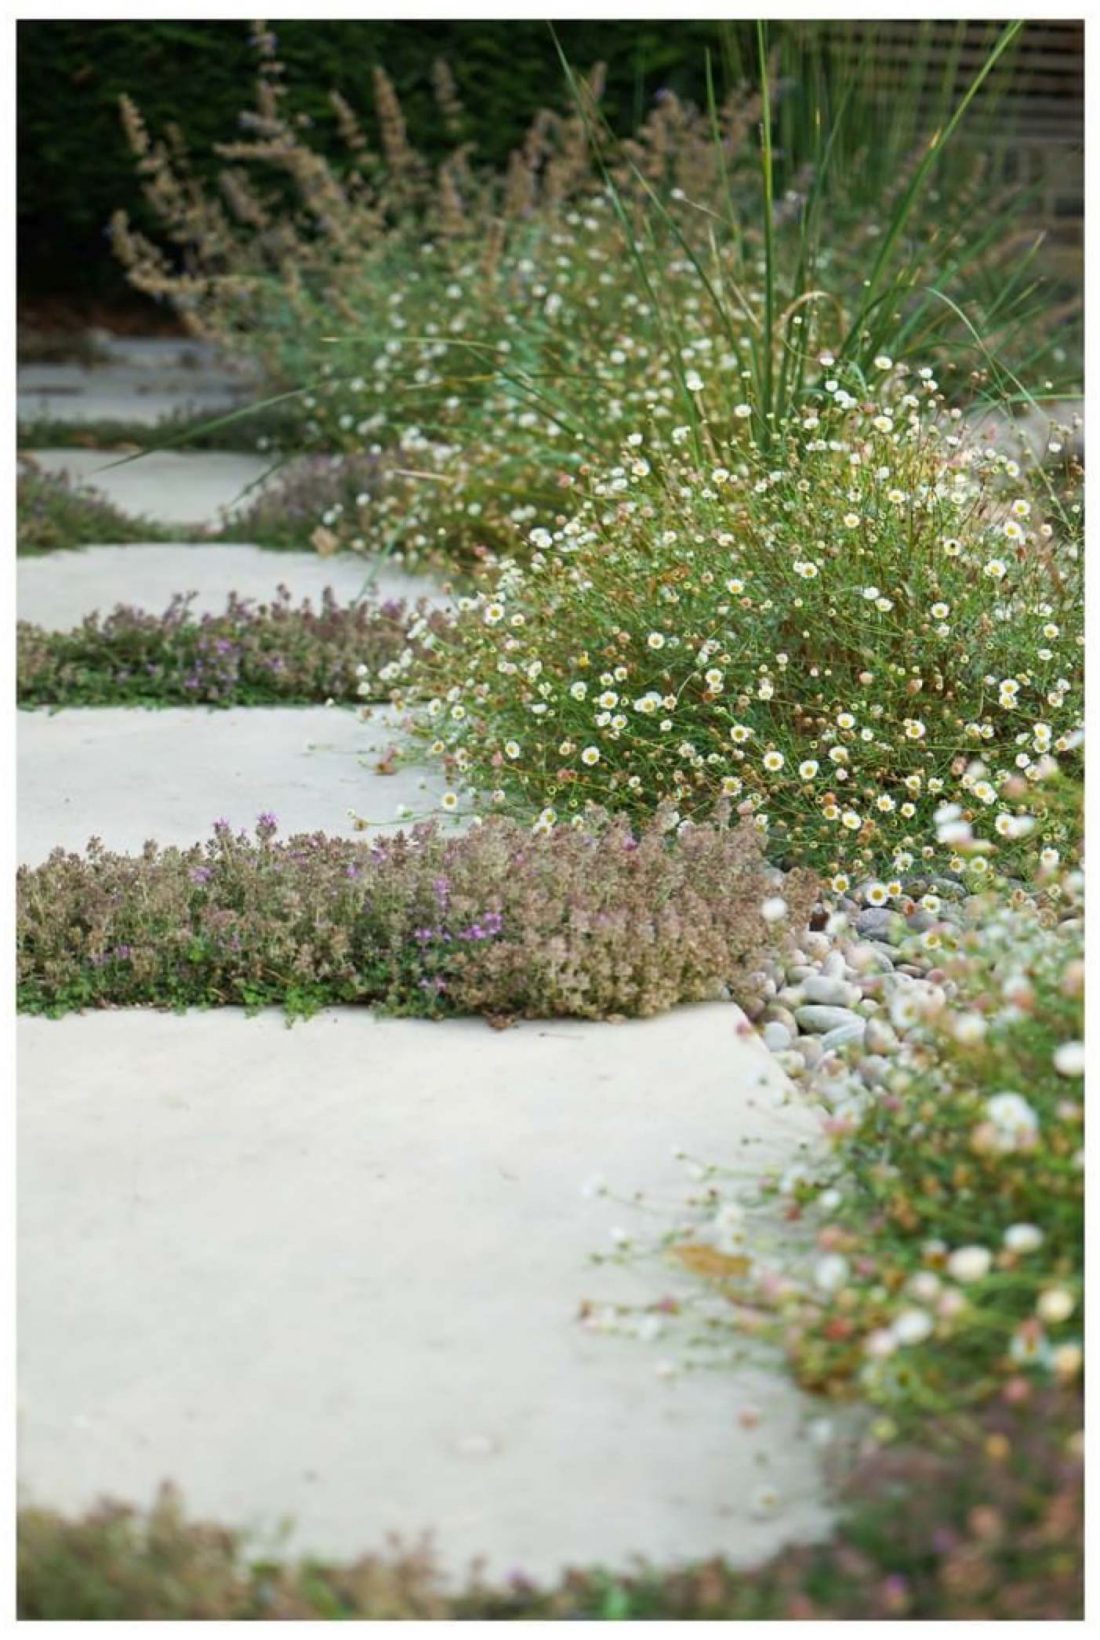 Smooth stepping stones, creeping thyme, and erigeron in a contemporary cottage garden. image by @farlamandchandler